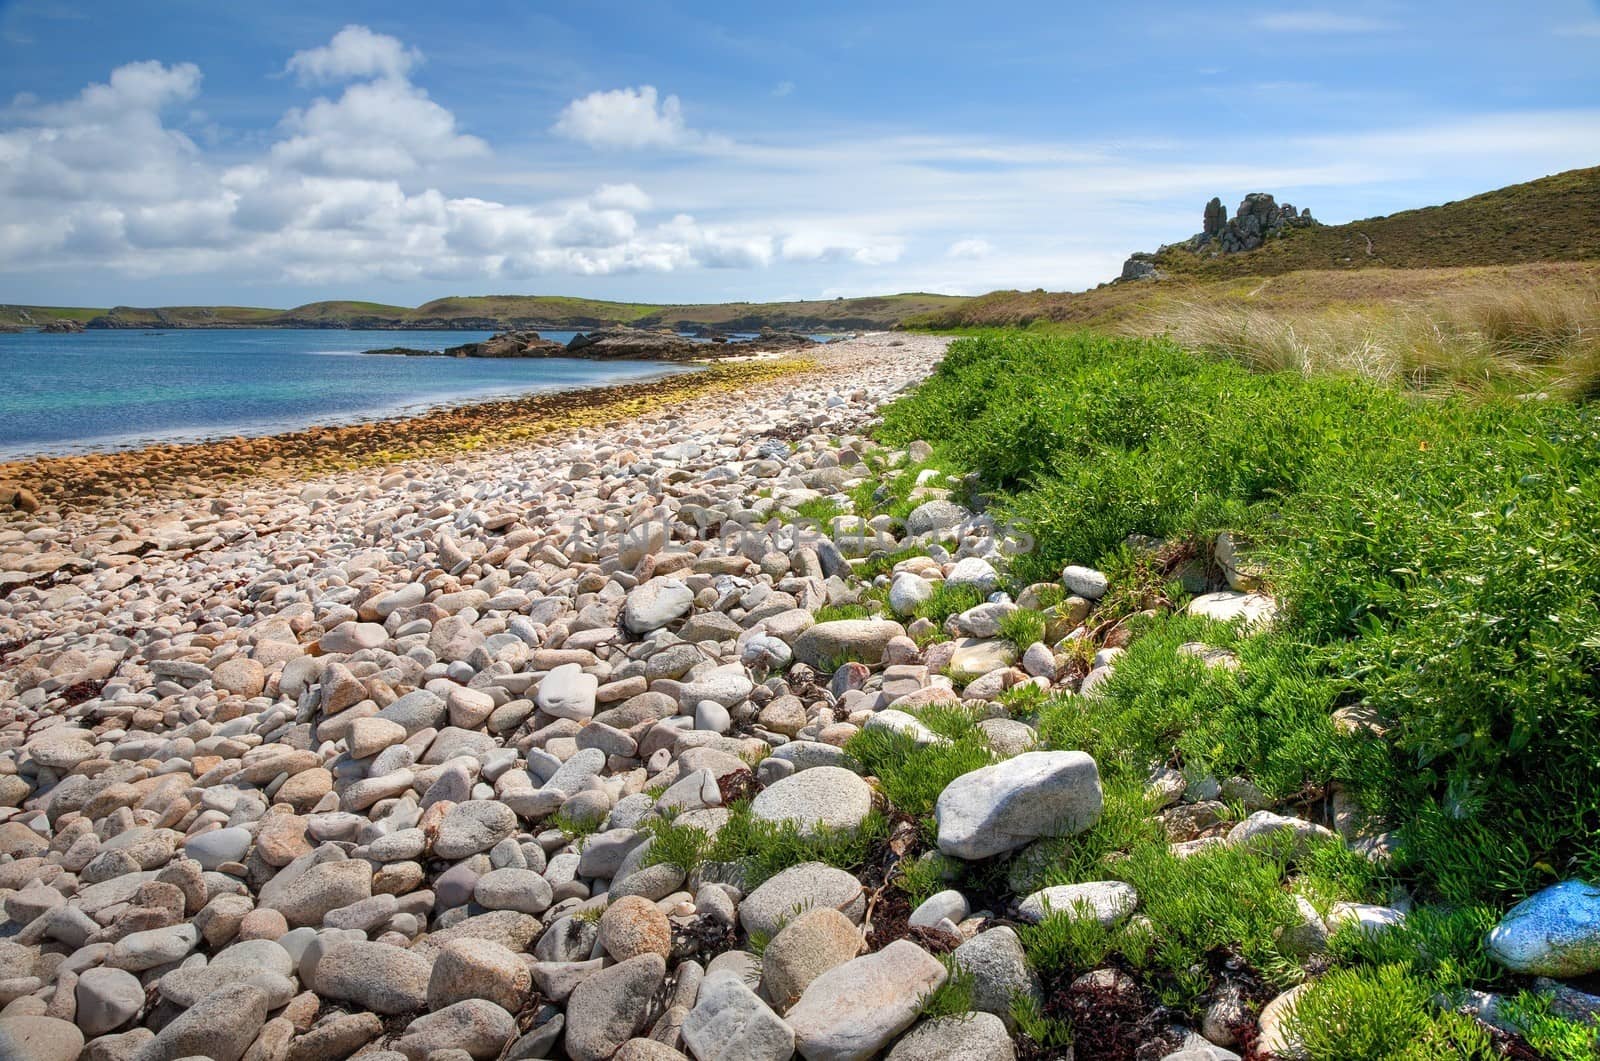 Pebble beach on the Cornish island of St Martin���s, Isles of Scilly, England.